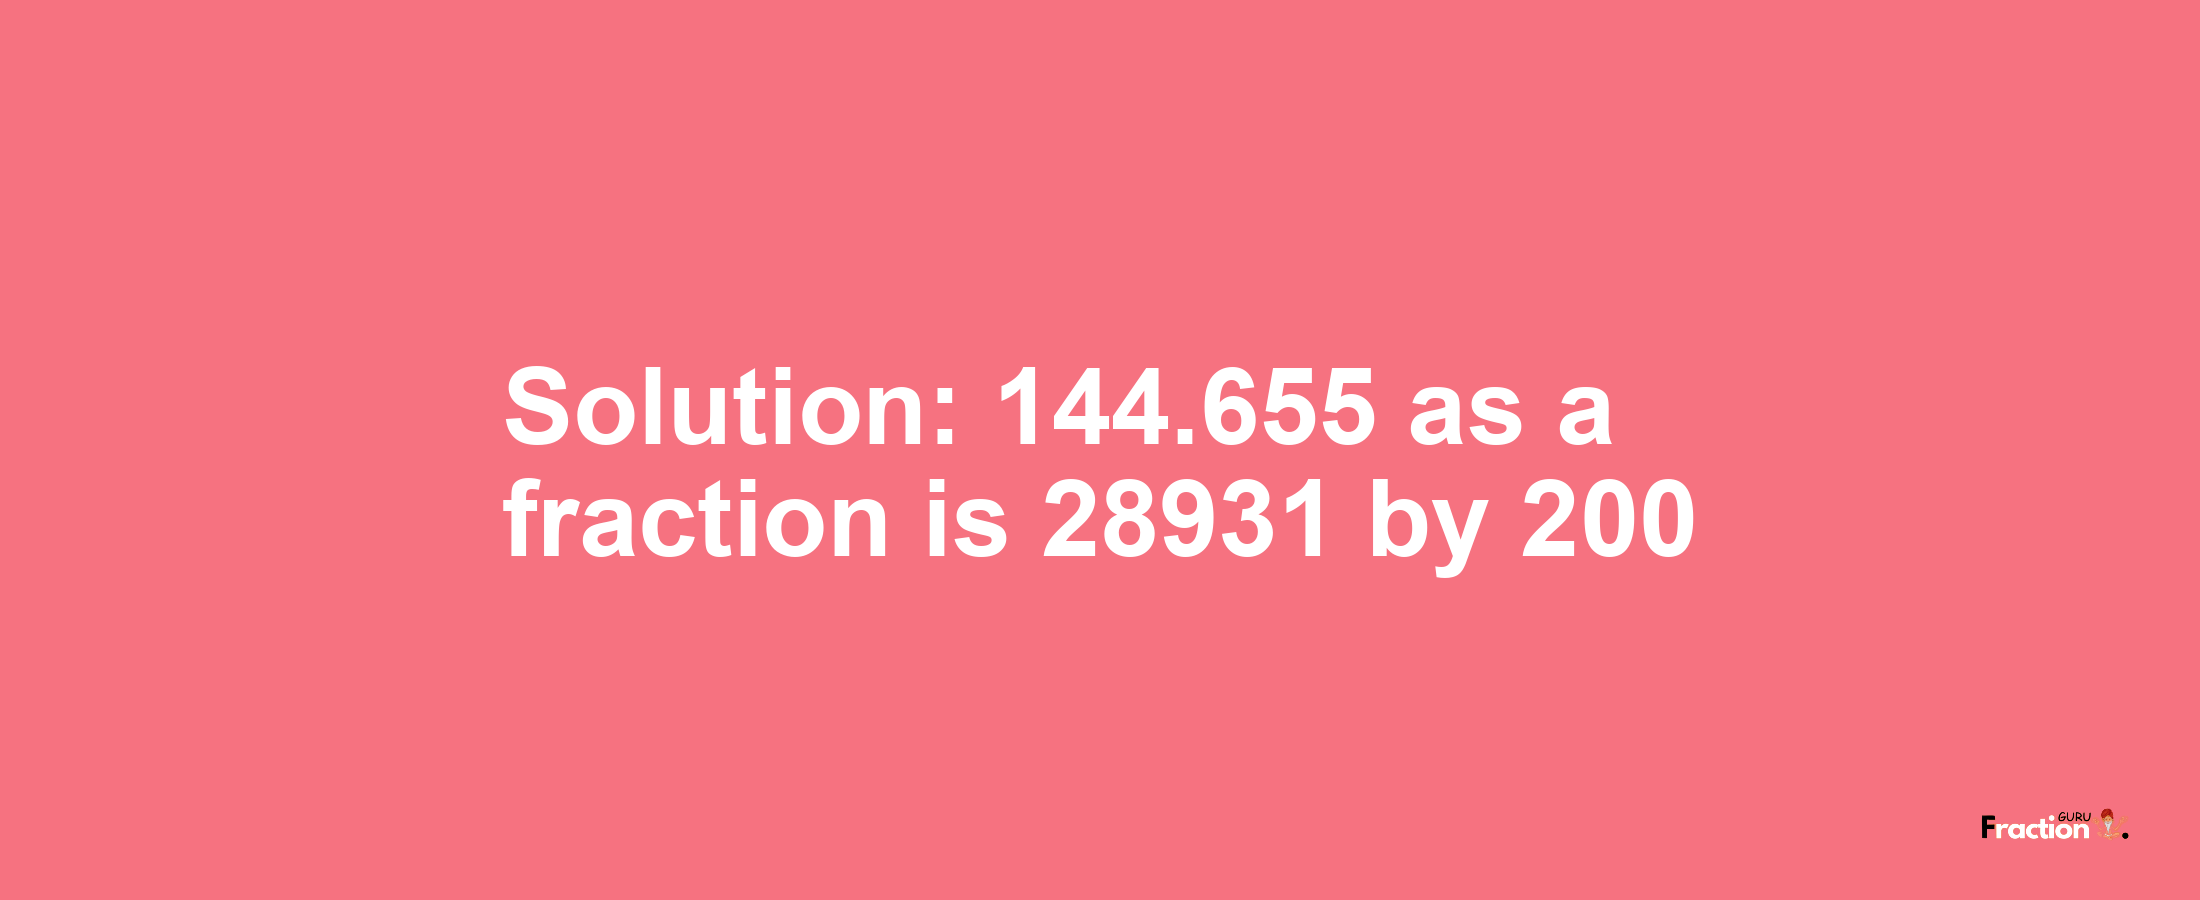 Solution:144.655 as a fraction is 28931/200